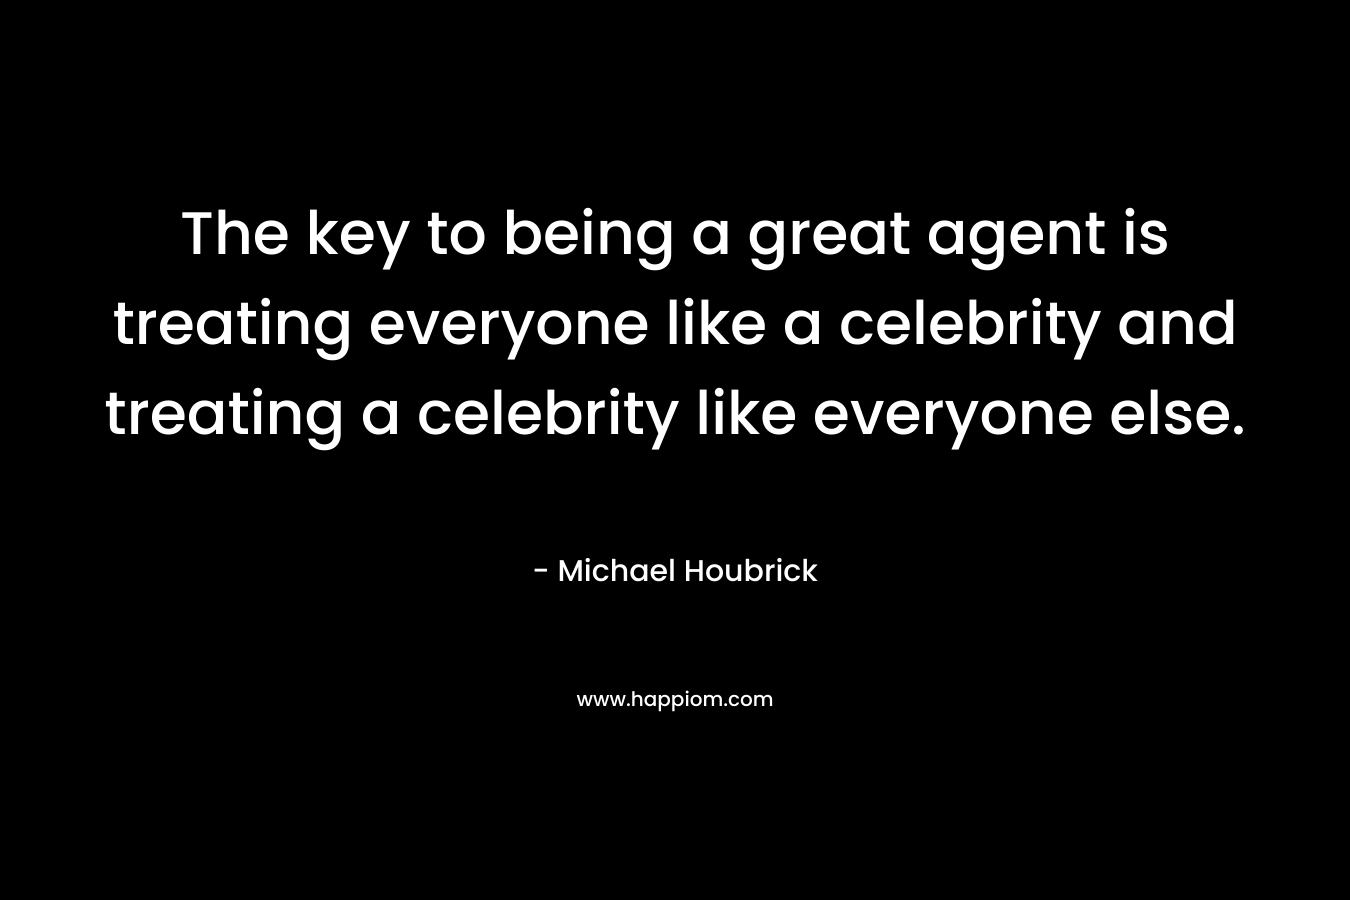 The key to being a great agent is treating everyone like a celebrity and treating a celebrity like everyone else. – Michael Houbrick